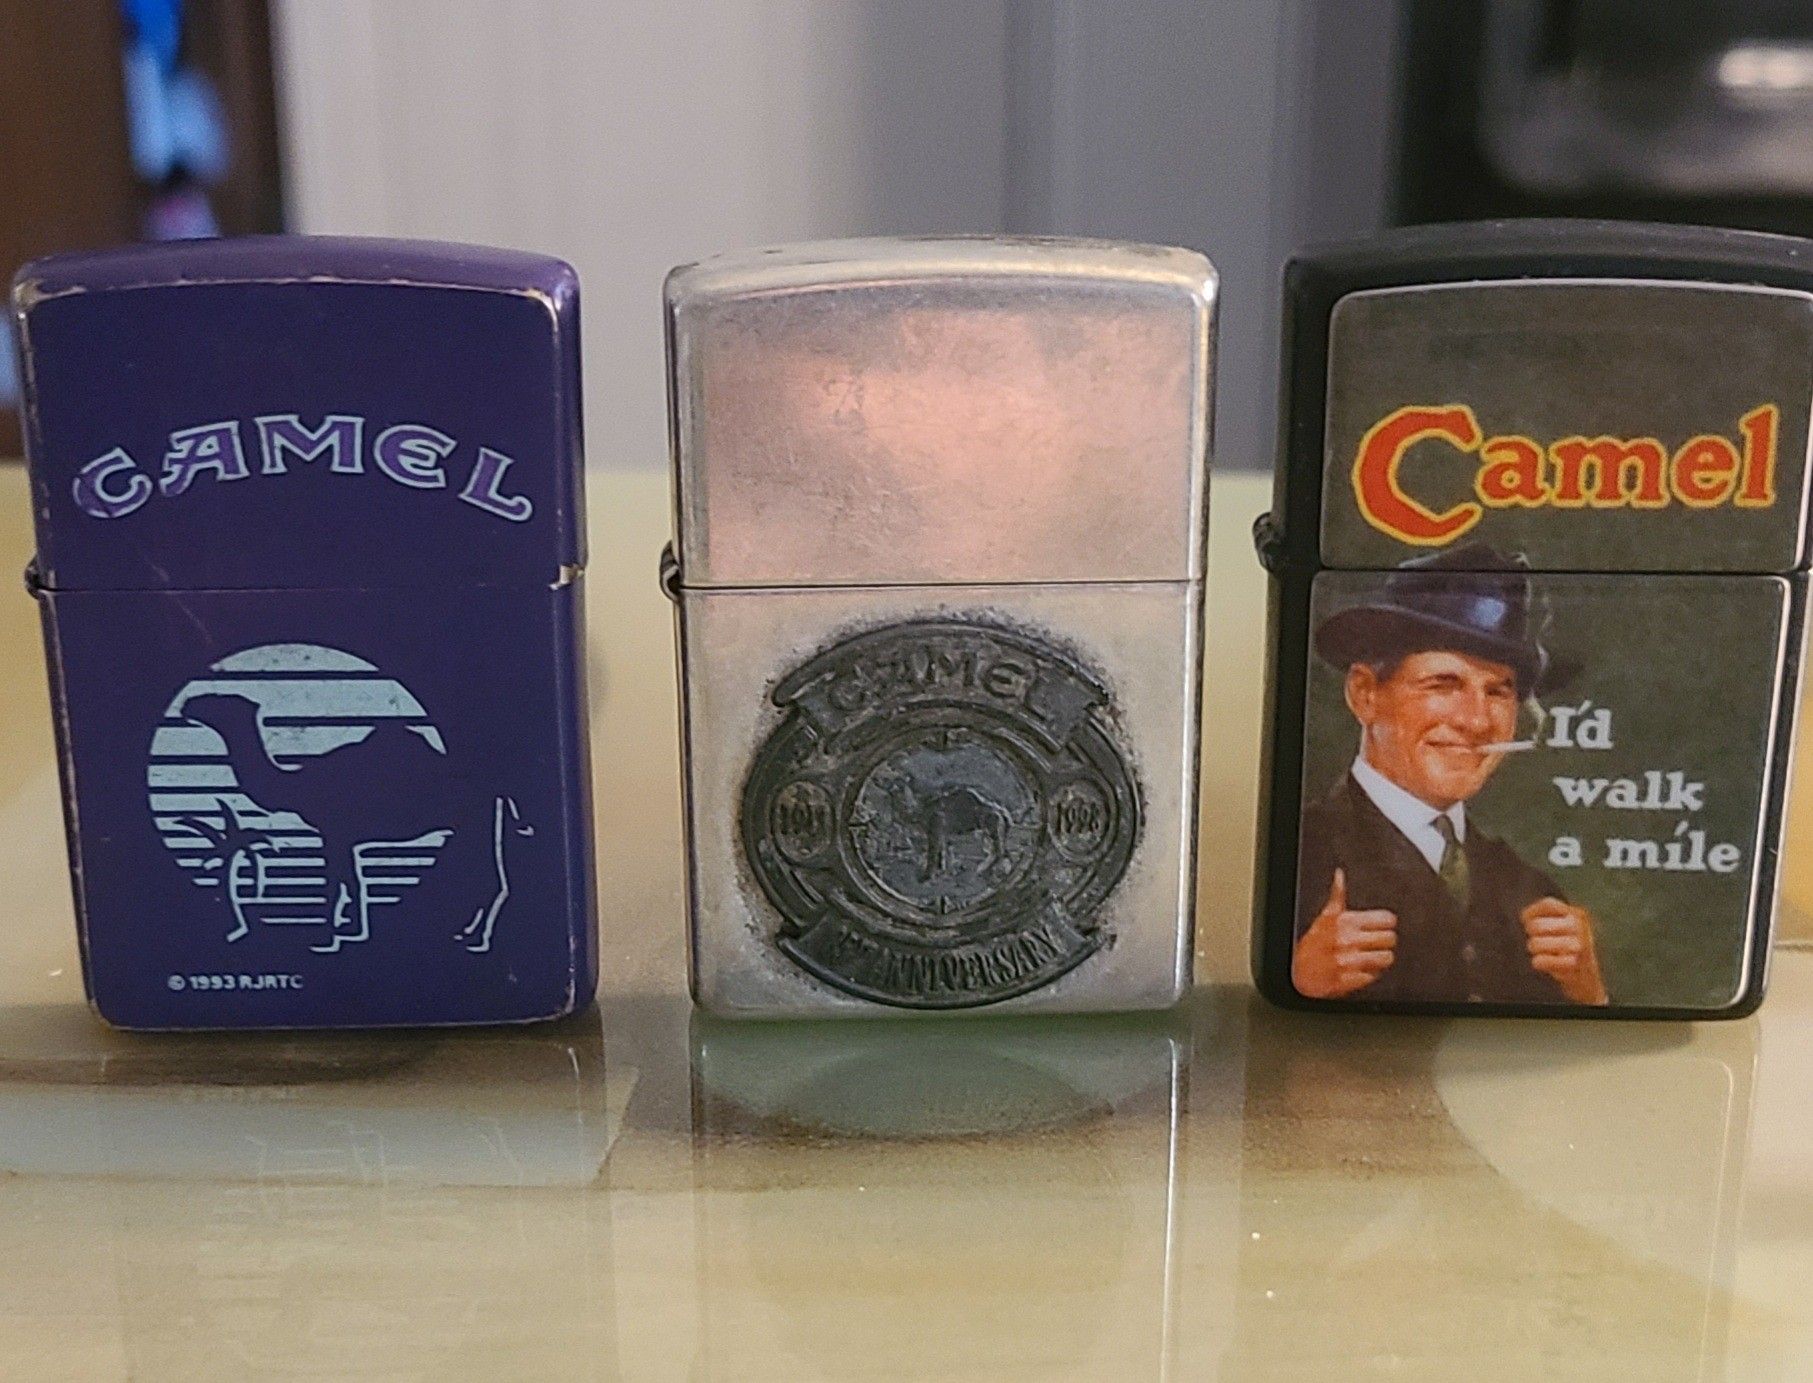 Vintage Zippo Joe Camel lighters. Purple one is 1993, the I'd walk a mile is 1995, and the other one is the 85th Anniversary one.